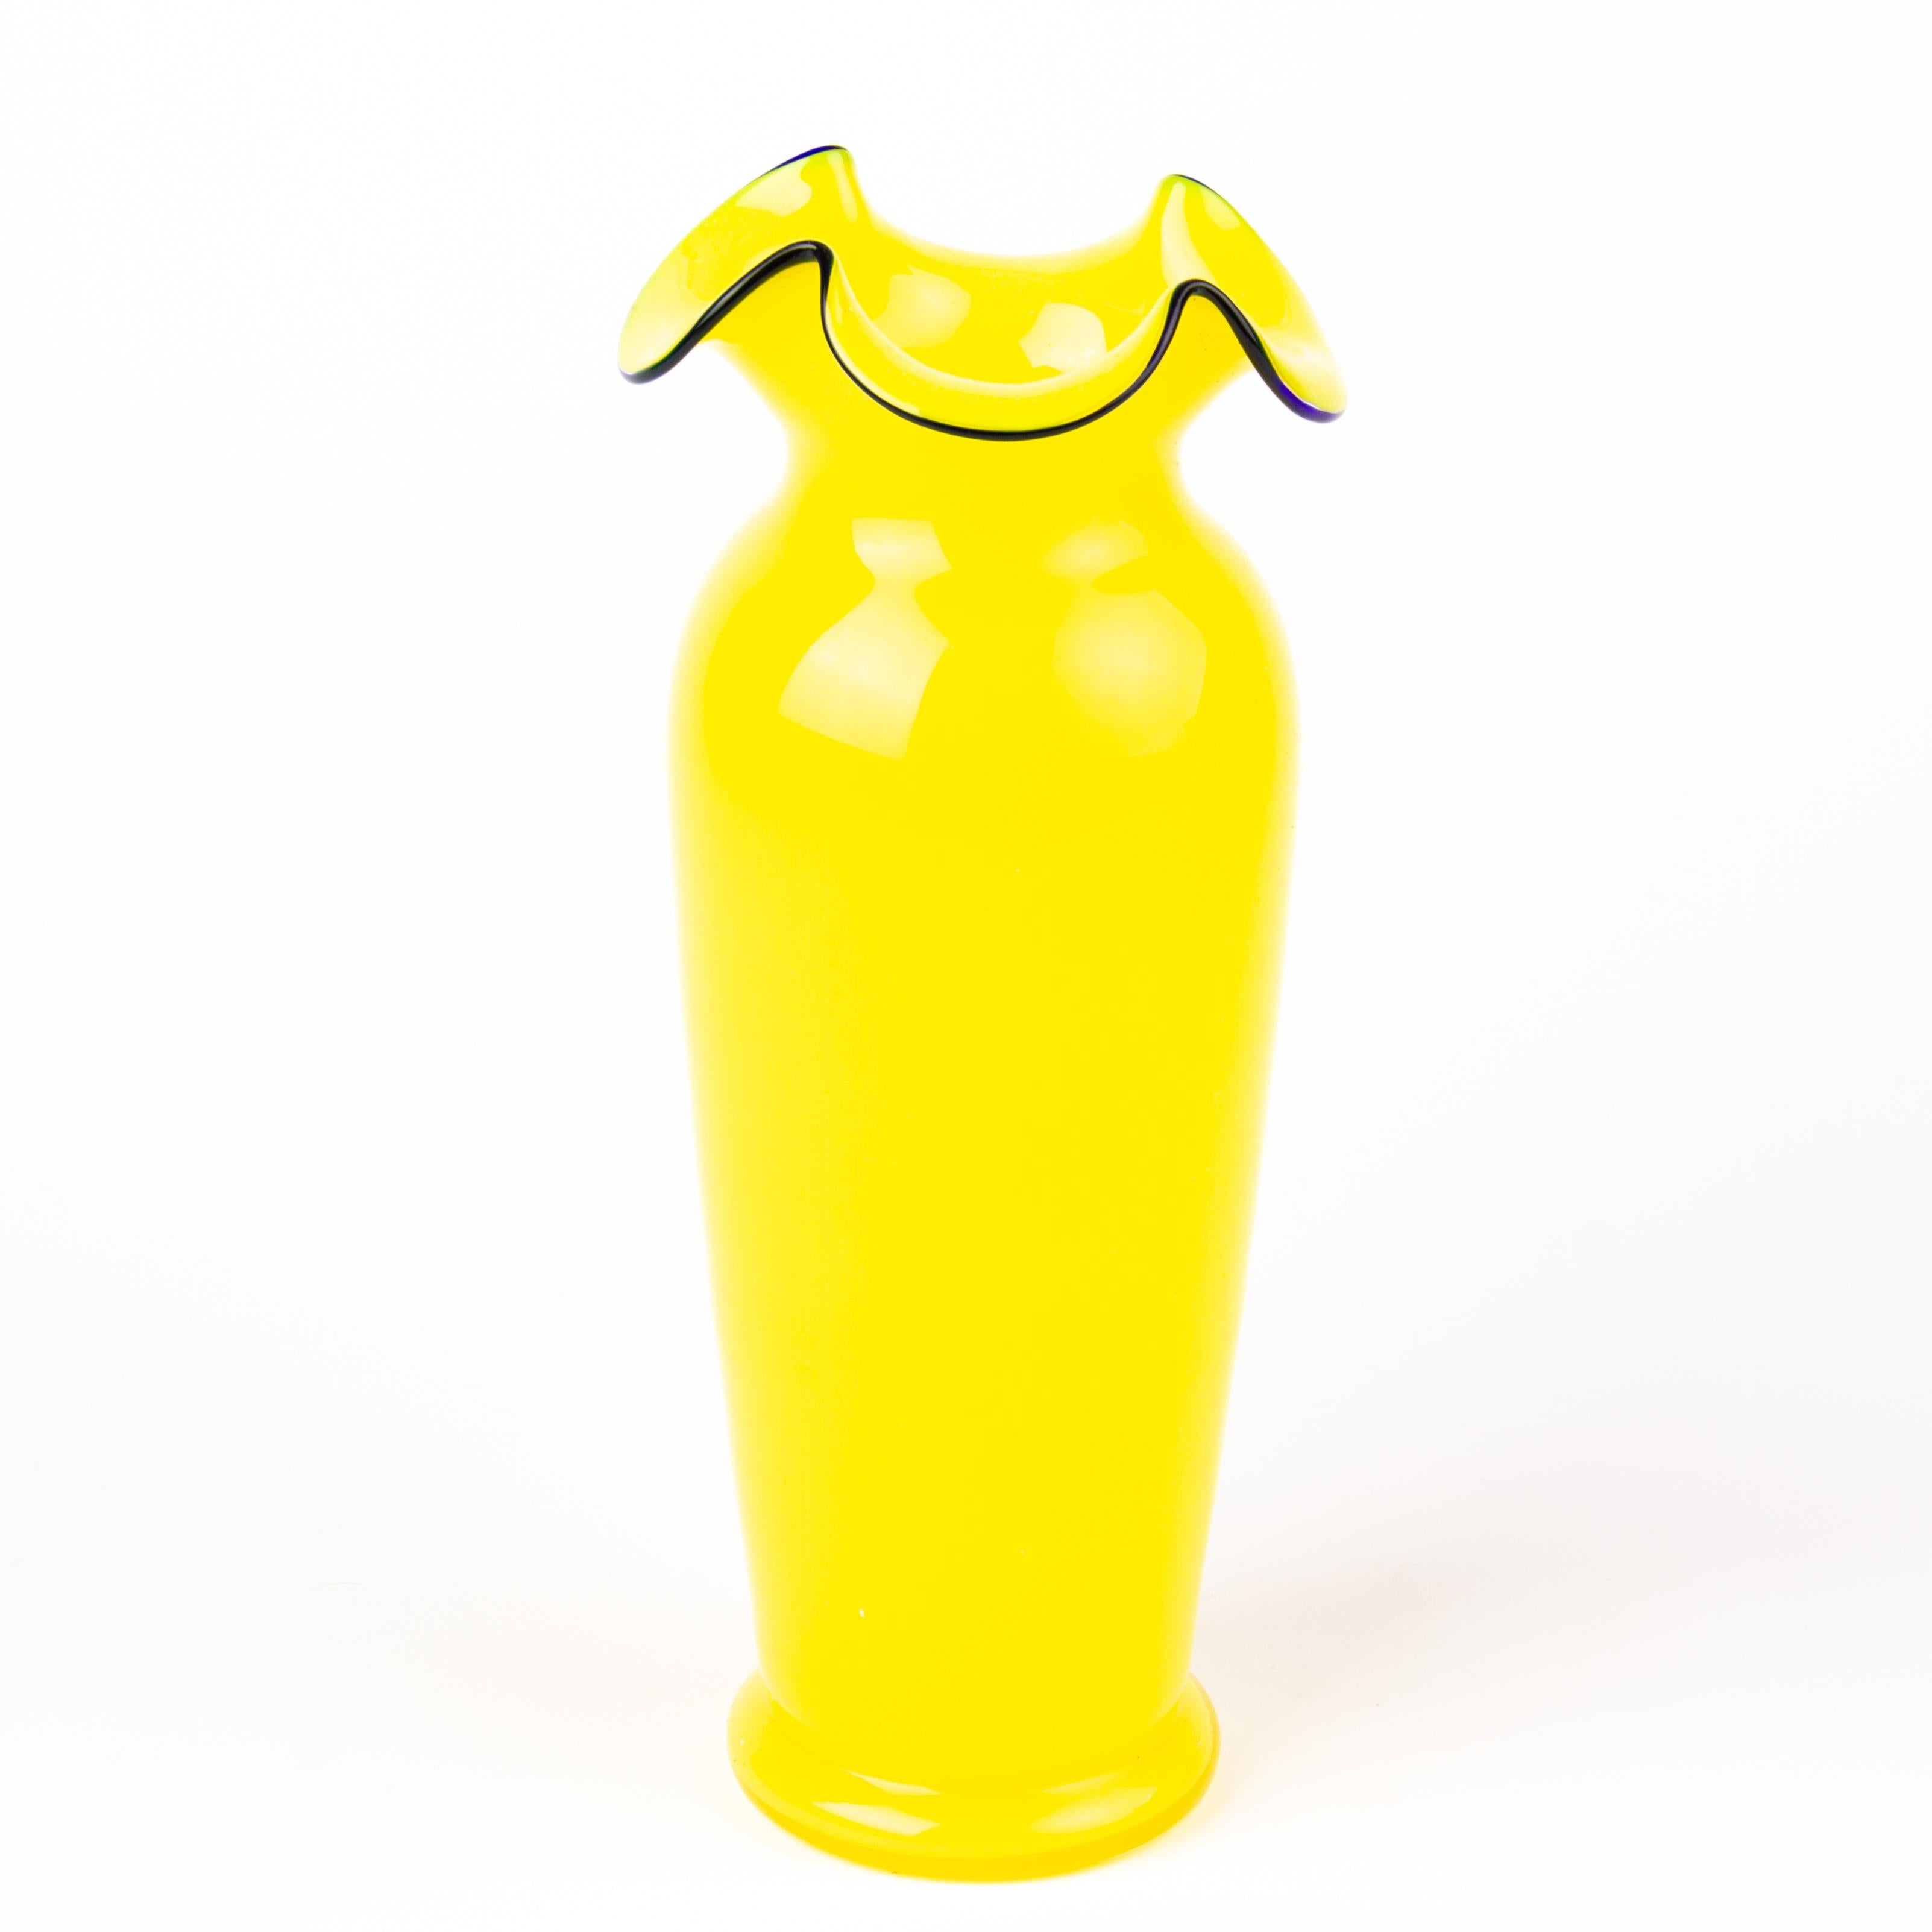 In good condition
From a private collection
Michael Powolny Loetz Yellow Opaline Glass Art Deco Vase
